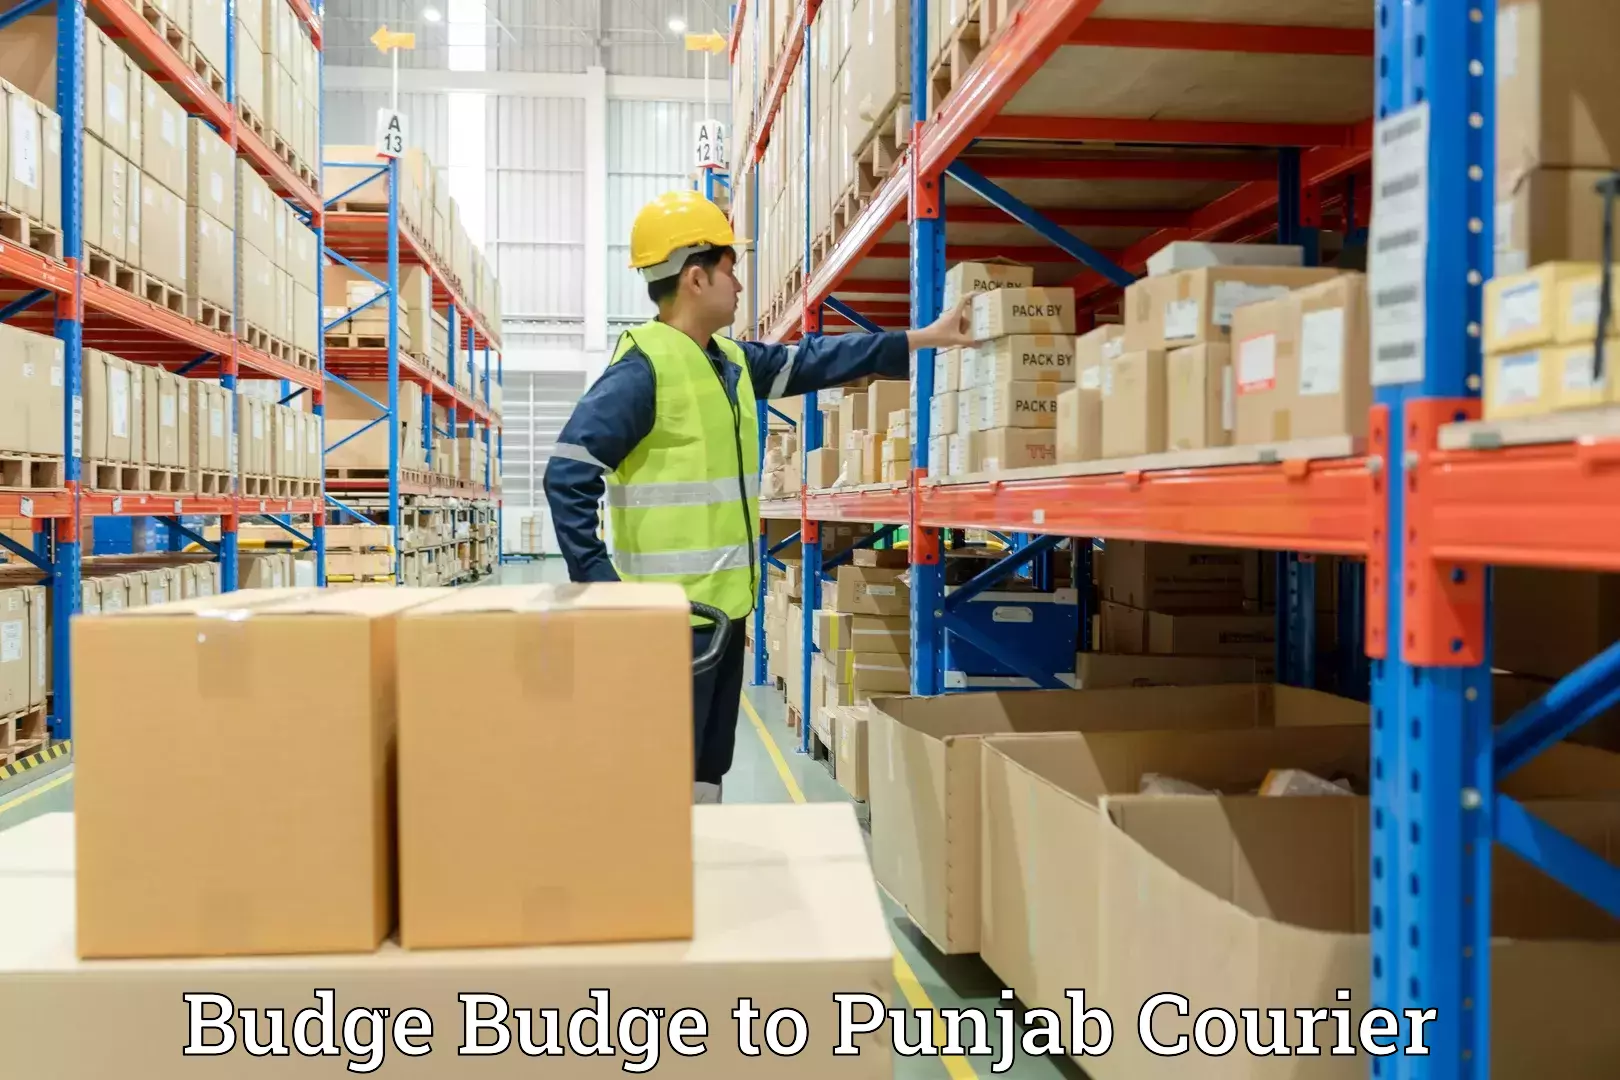 Furniture moving specialists Budge Budge to Punjab